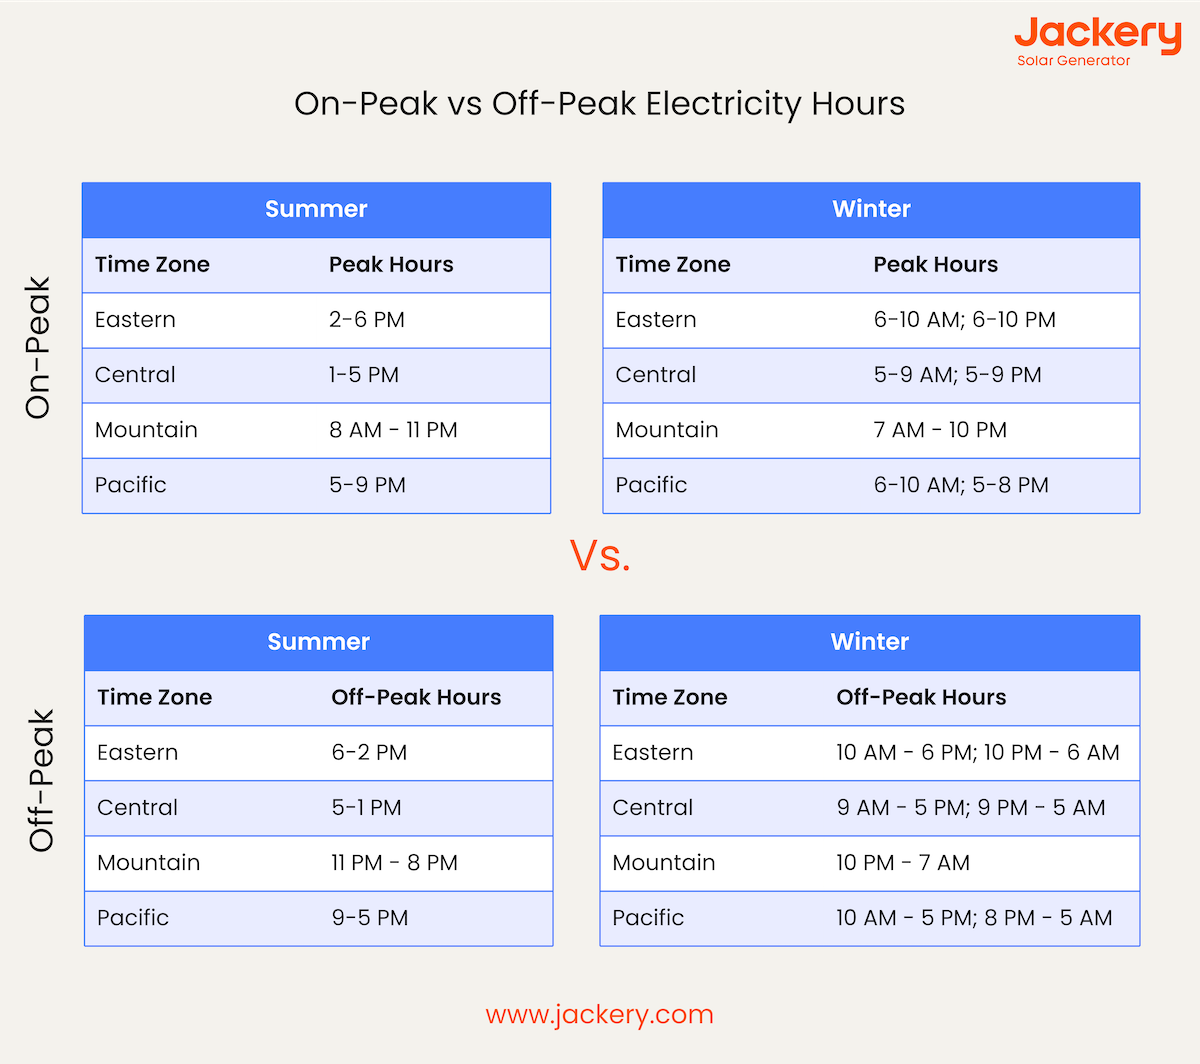 on peak electricity hours vs off peak electricity hours